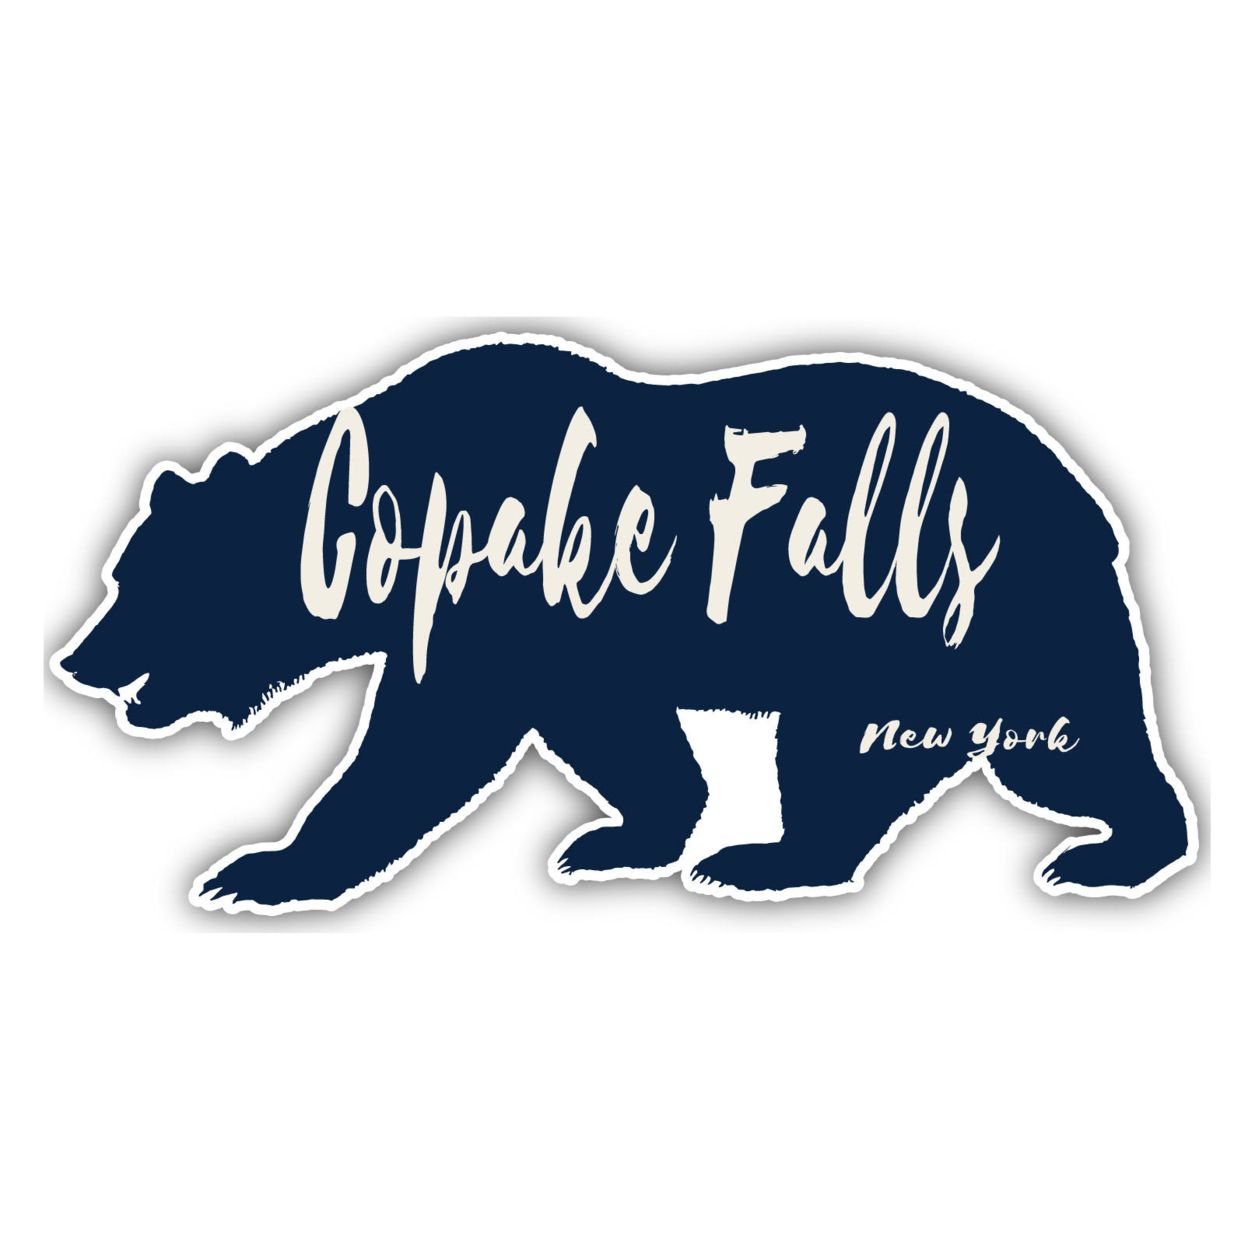 Copake Falls New York Souvenir Decorative Stickers (Choose Theme And Size) - 4-Pack, 2-Inch, Bear